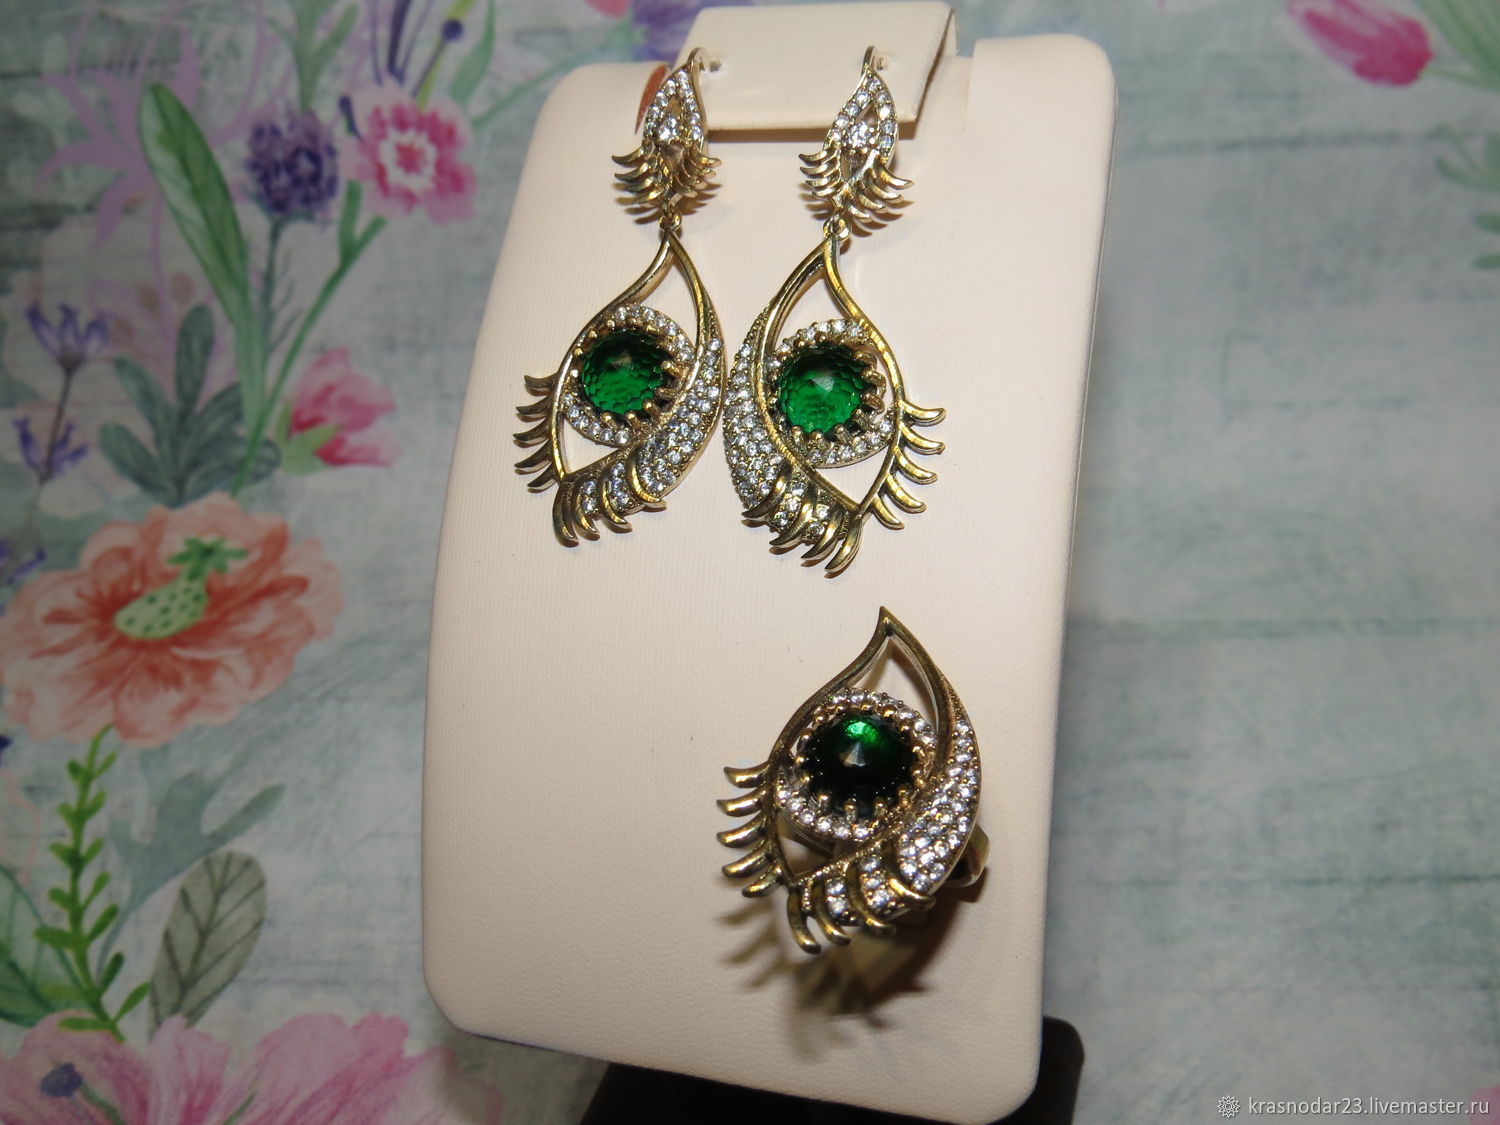 A set of 925 sterling SILVER with elements of bronze gilt, decorated with cut quartz briolette elegant dark green (rich emerald) and sparkling zircons.